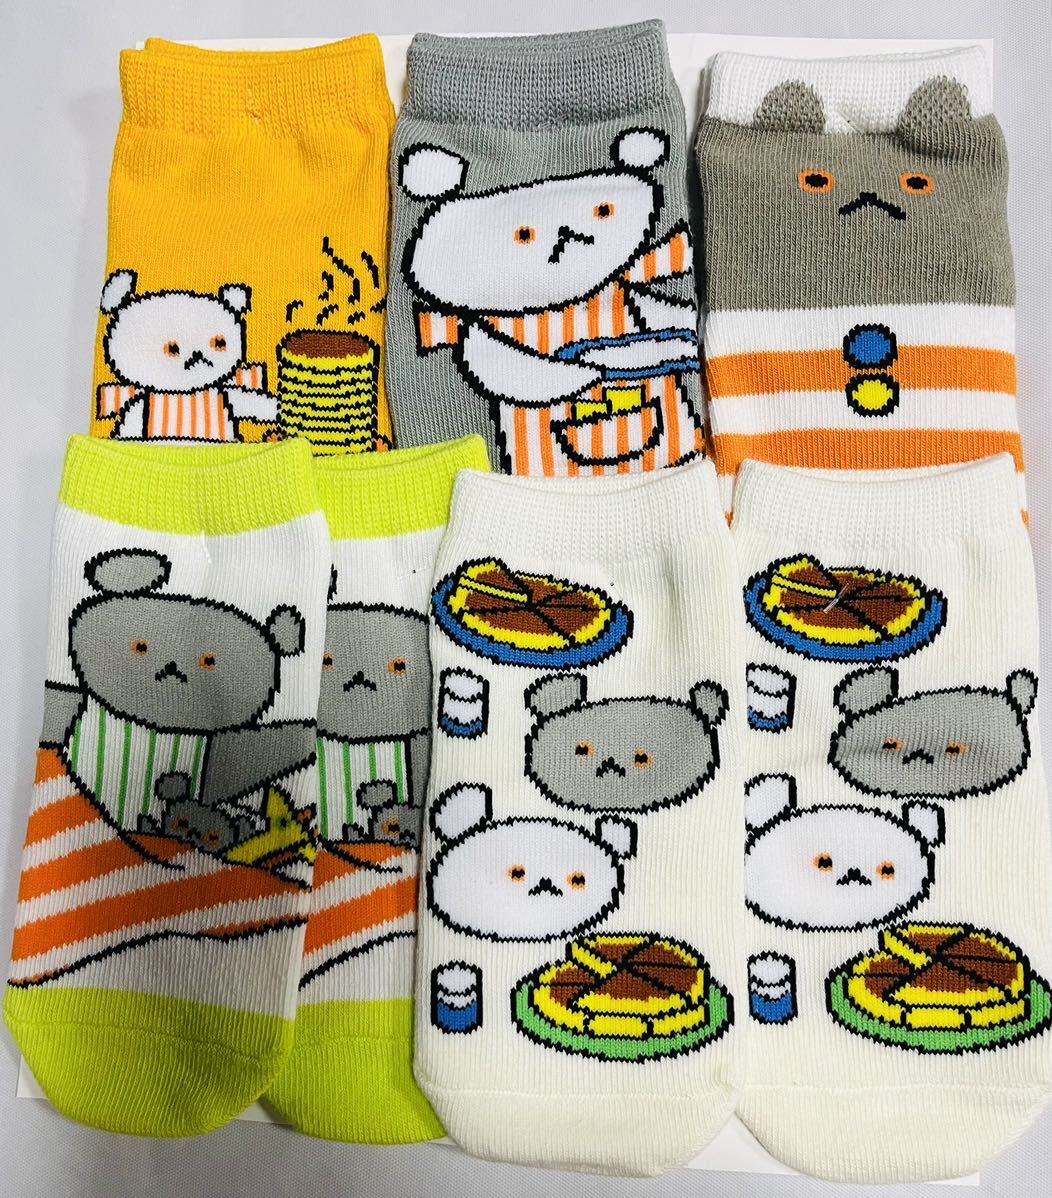  lucky bag 3F4930* super-discount sale!! new goods ... clothes socks socks 5 pair collection size9~15cm*... Chan / picture book .......... company / set sale 